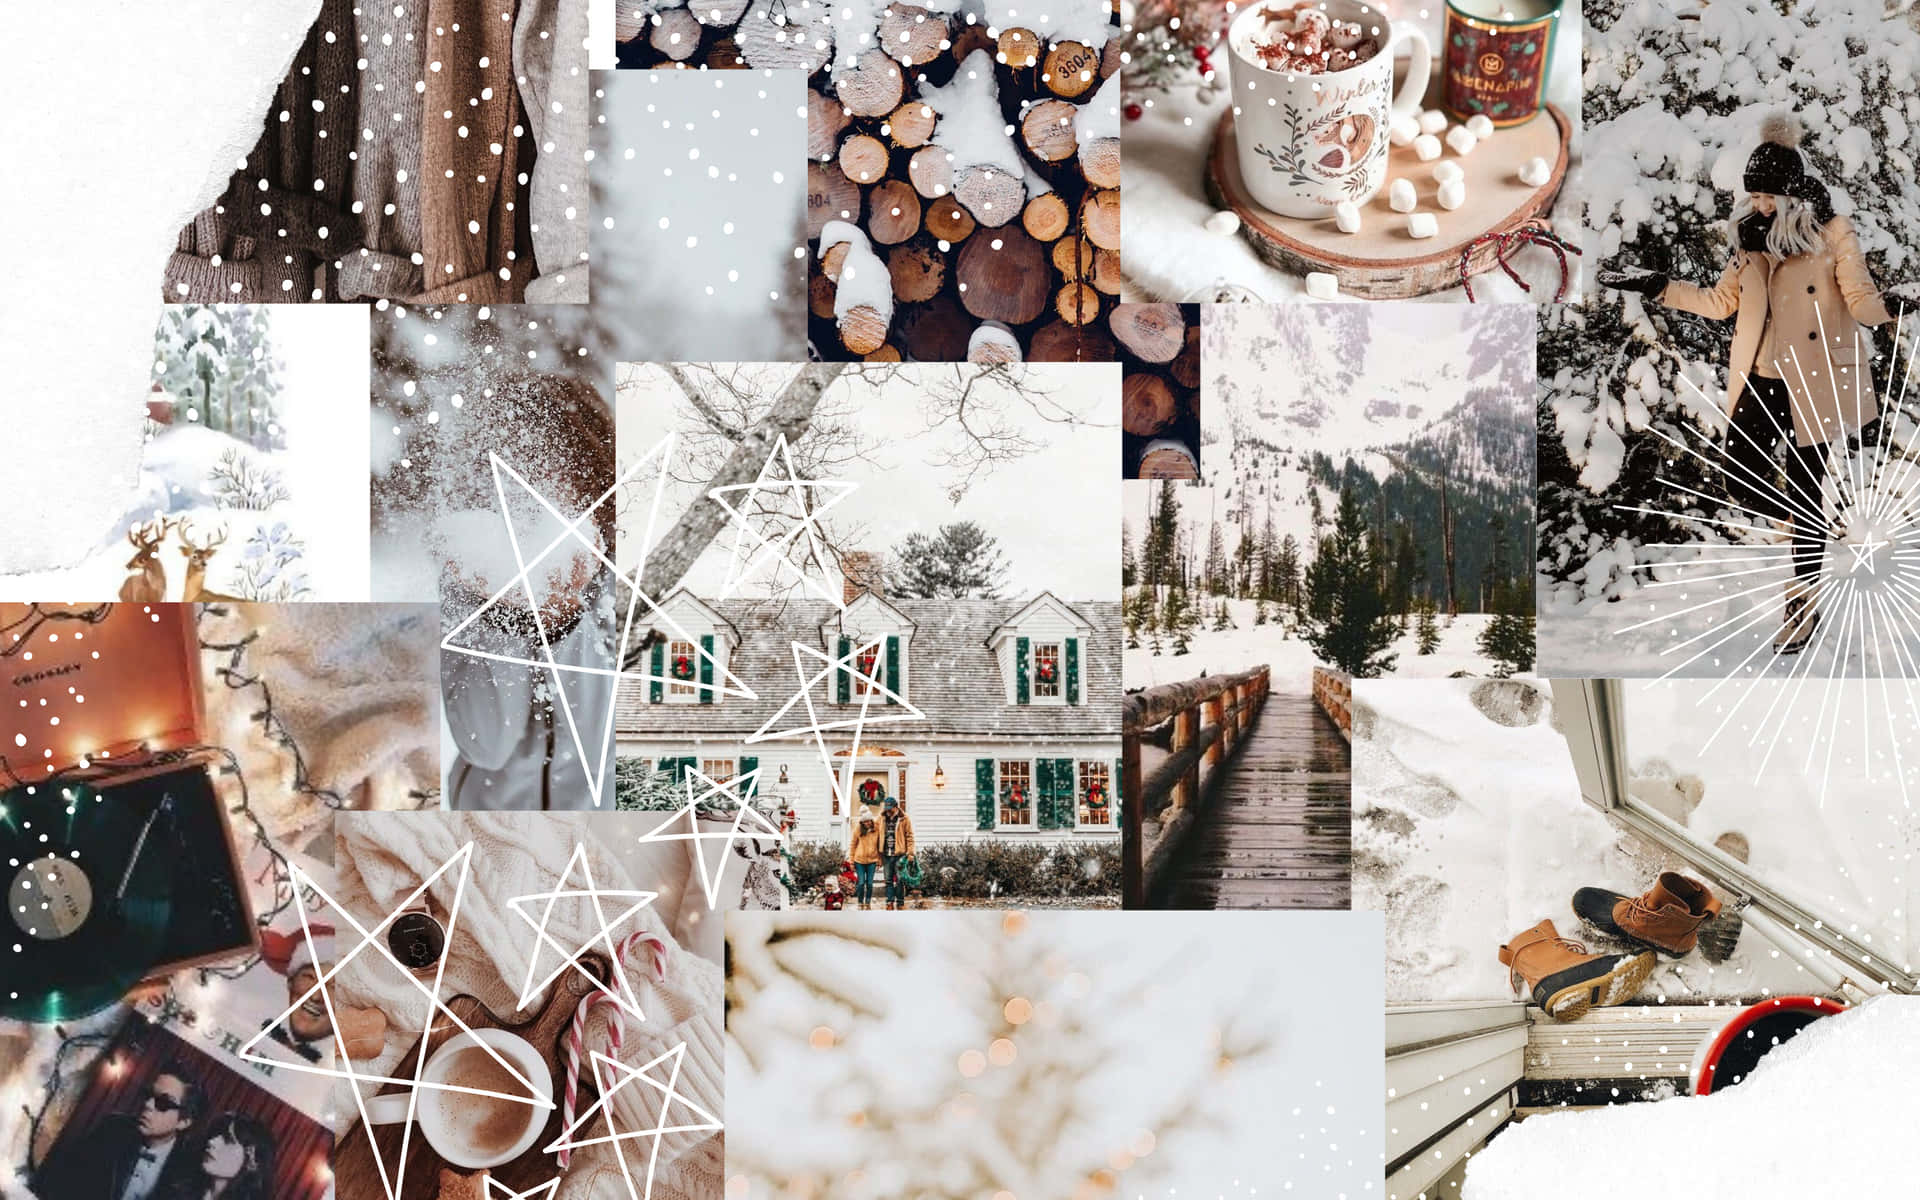 Enjoy a winter wonderland with this aesthetic collage Wallpaper